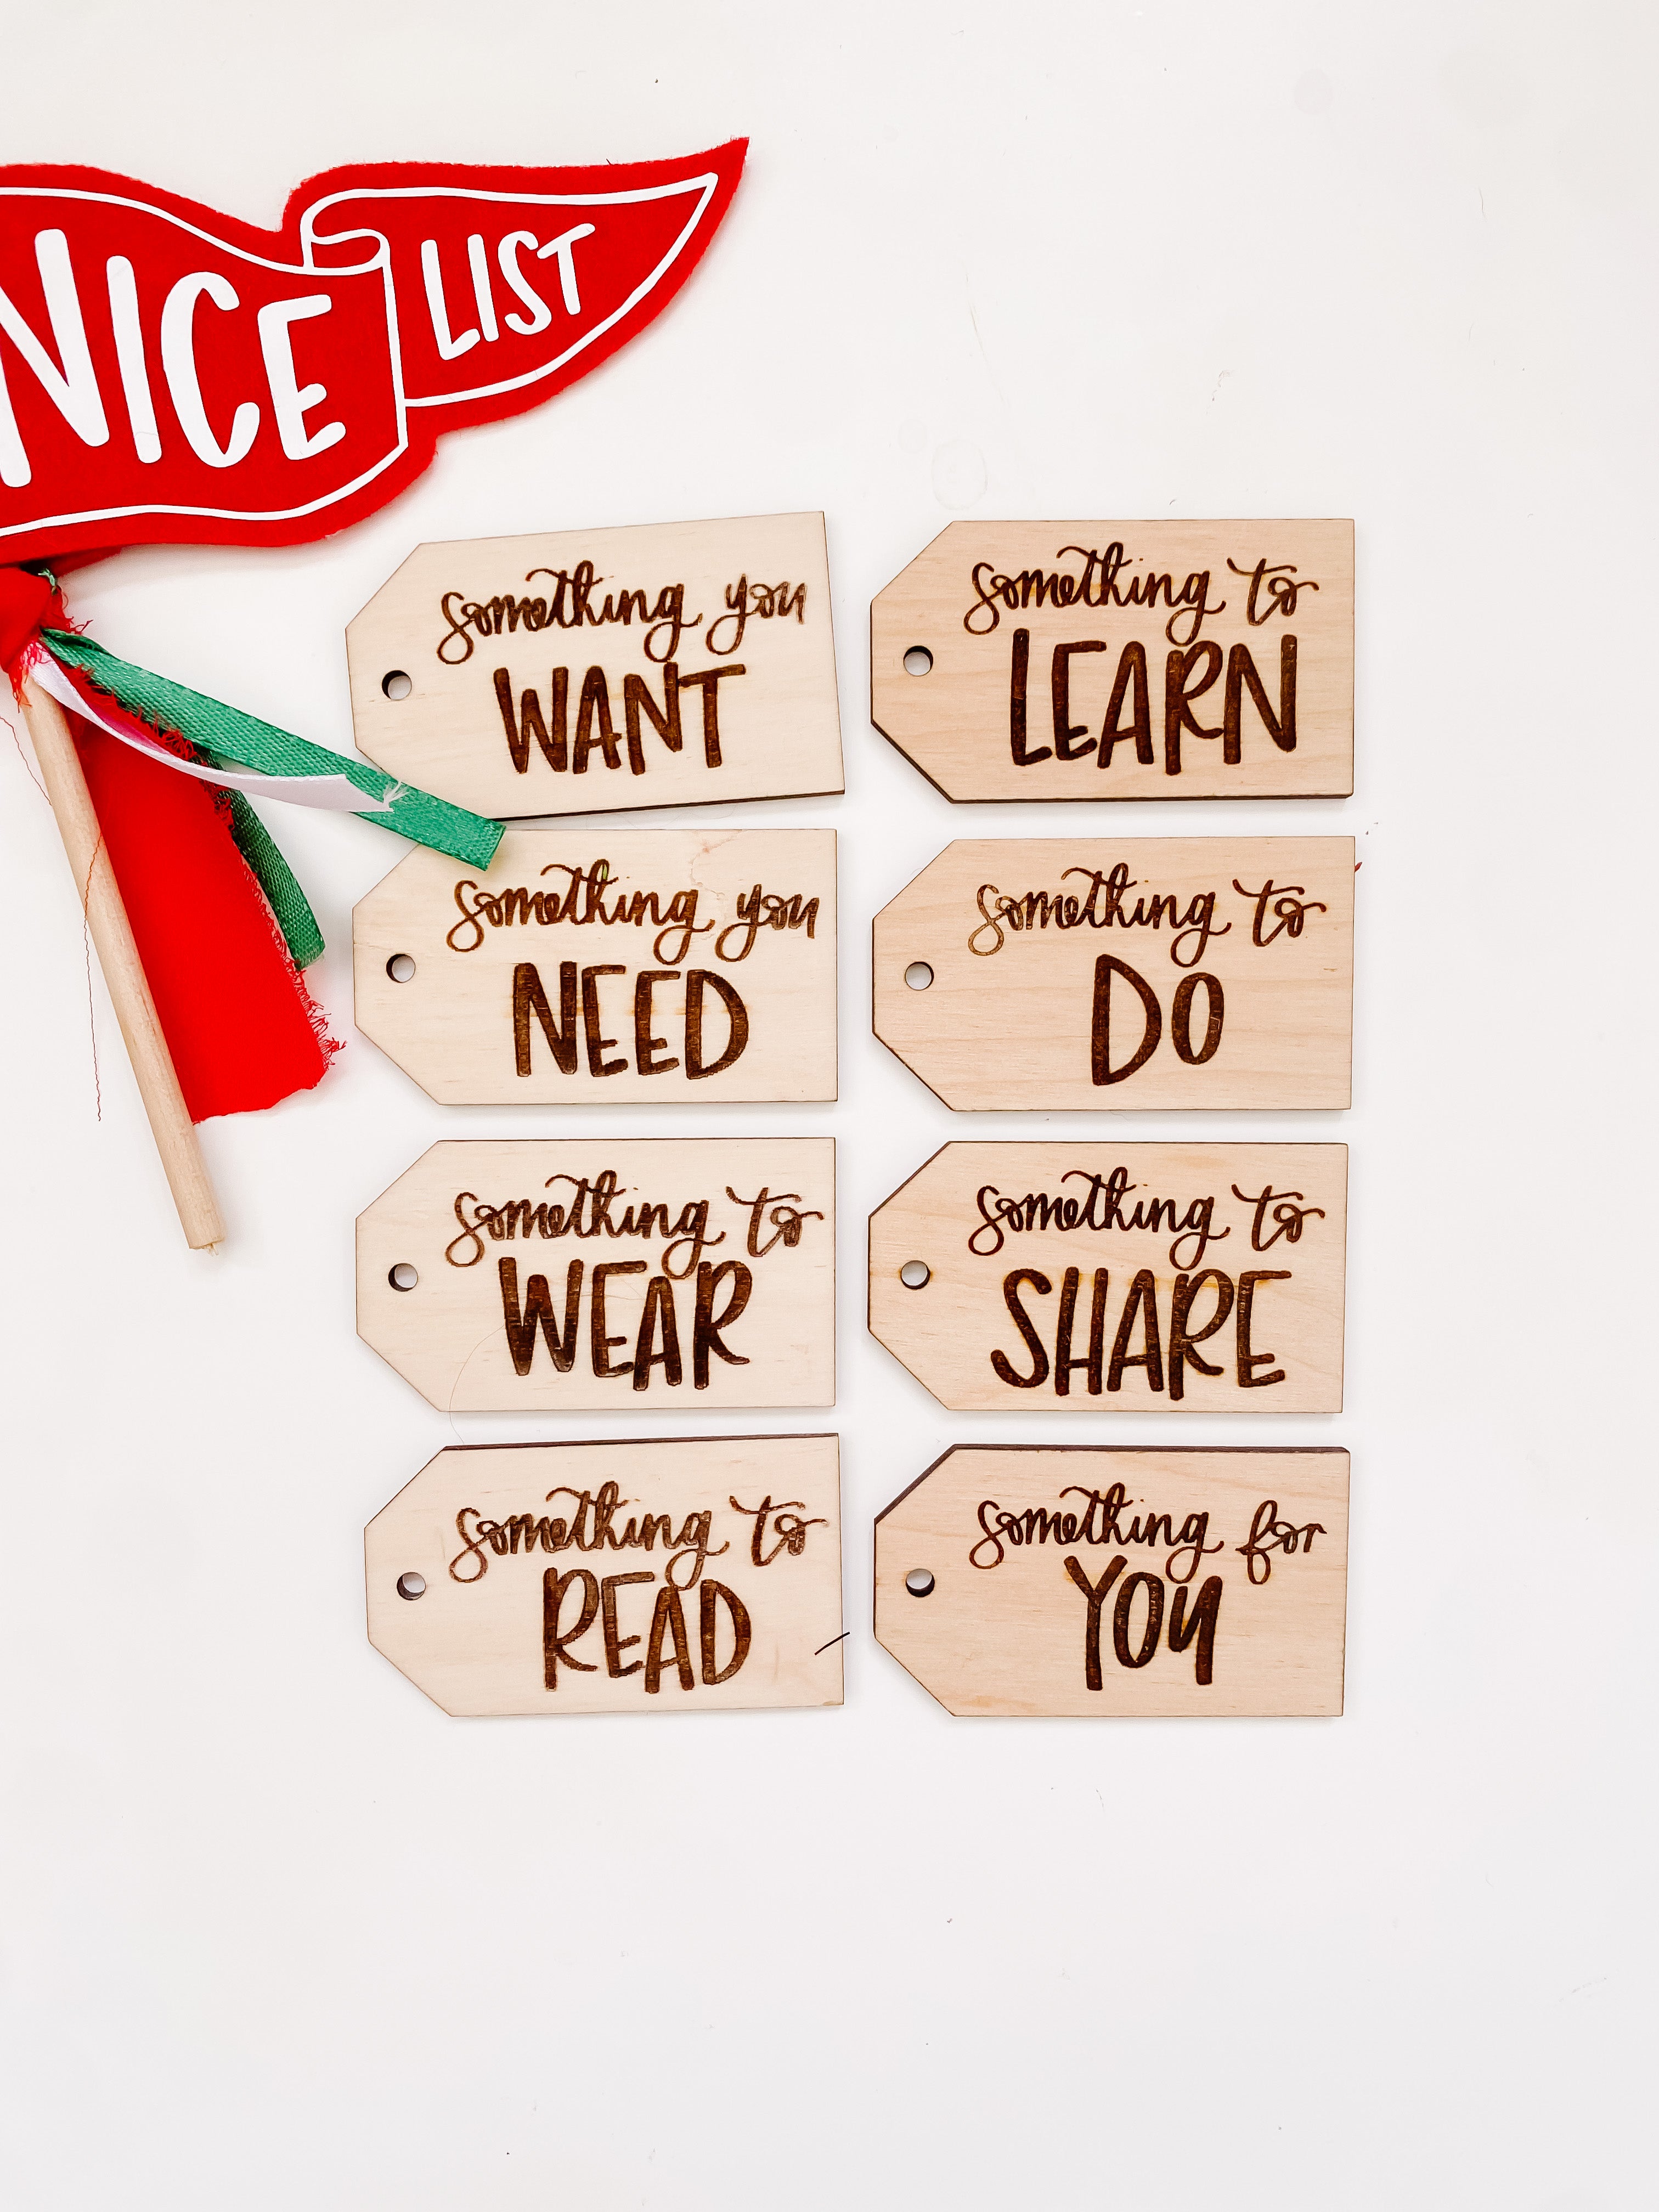 Want, Need, Wear, Read Present Tags